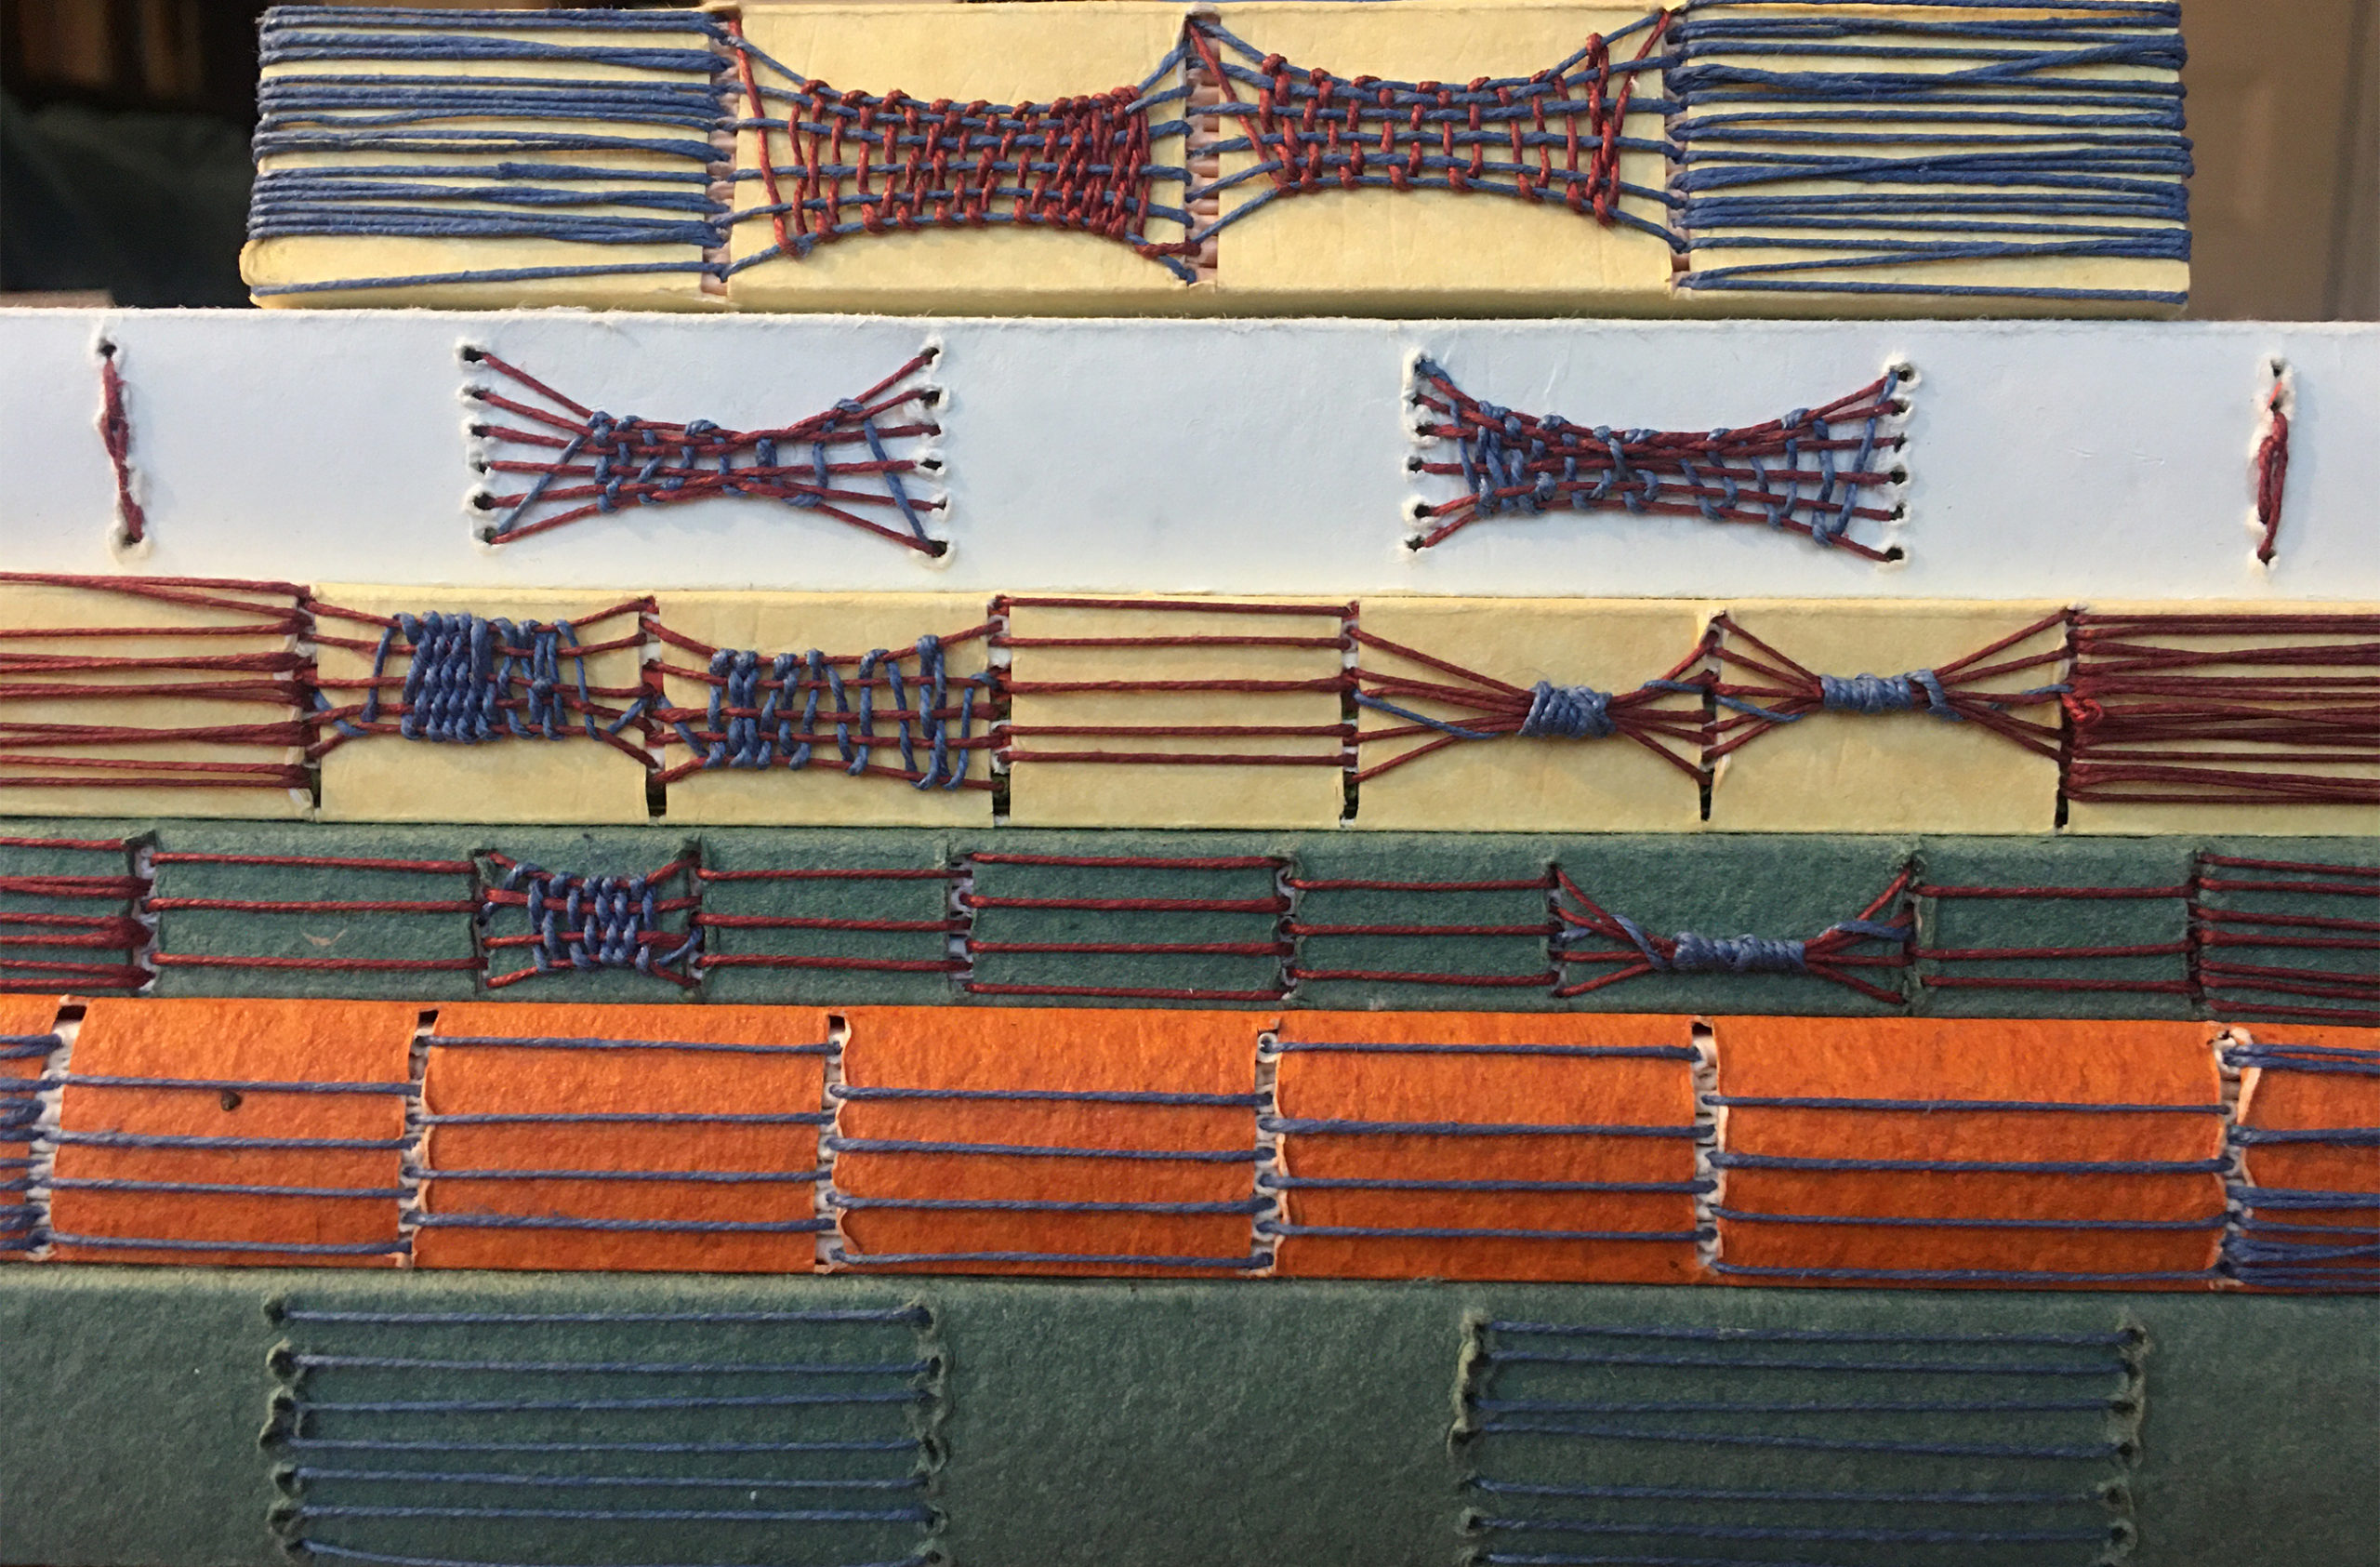 Examples of long & link stitch are stacked on top of one another. The photo shows the details of the spines.